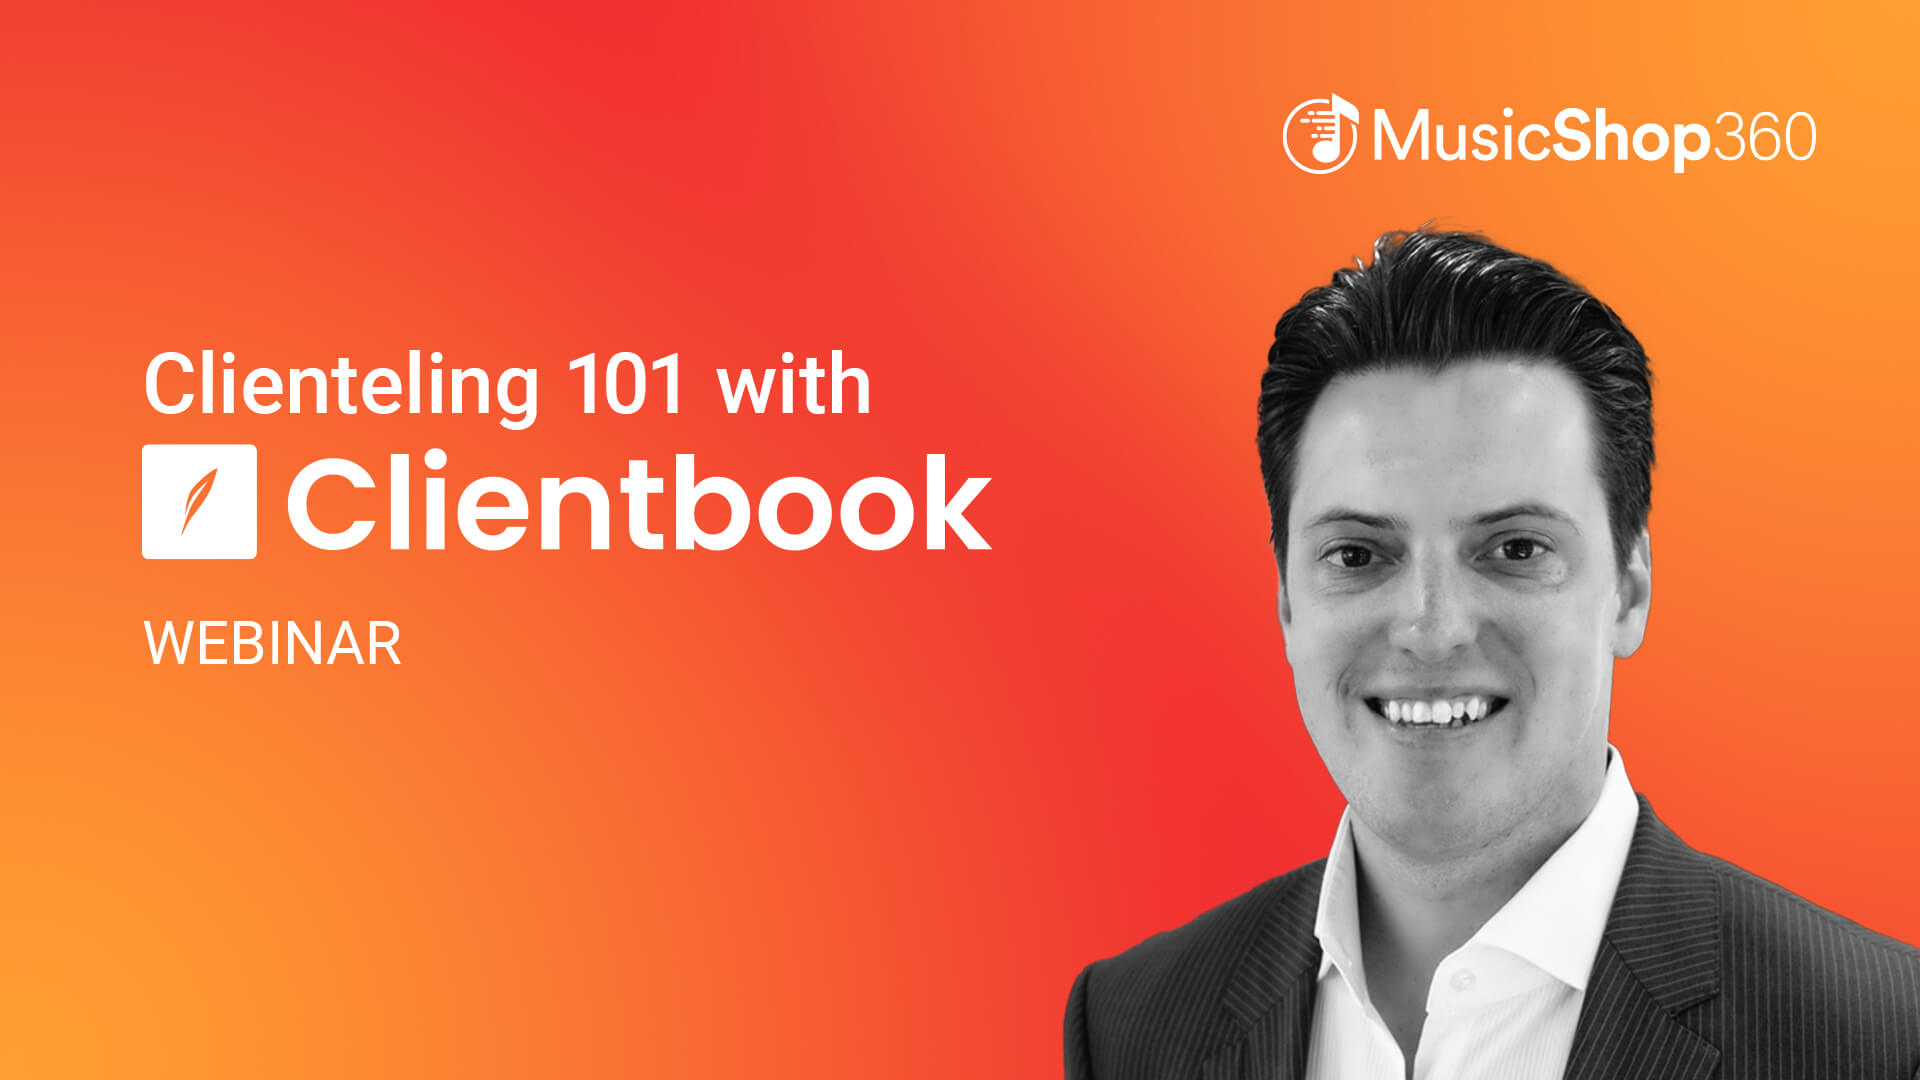 Clienteling 101 with Clientbook